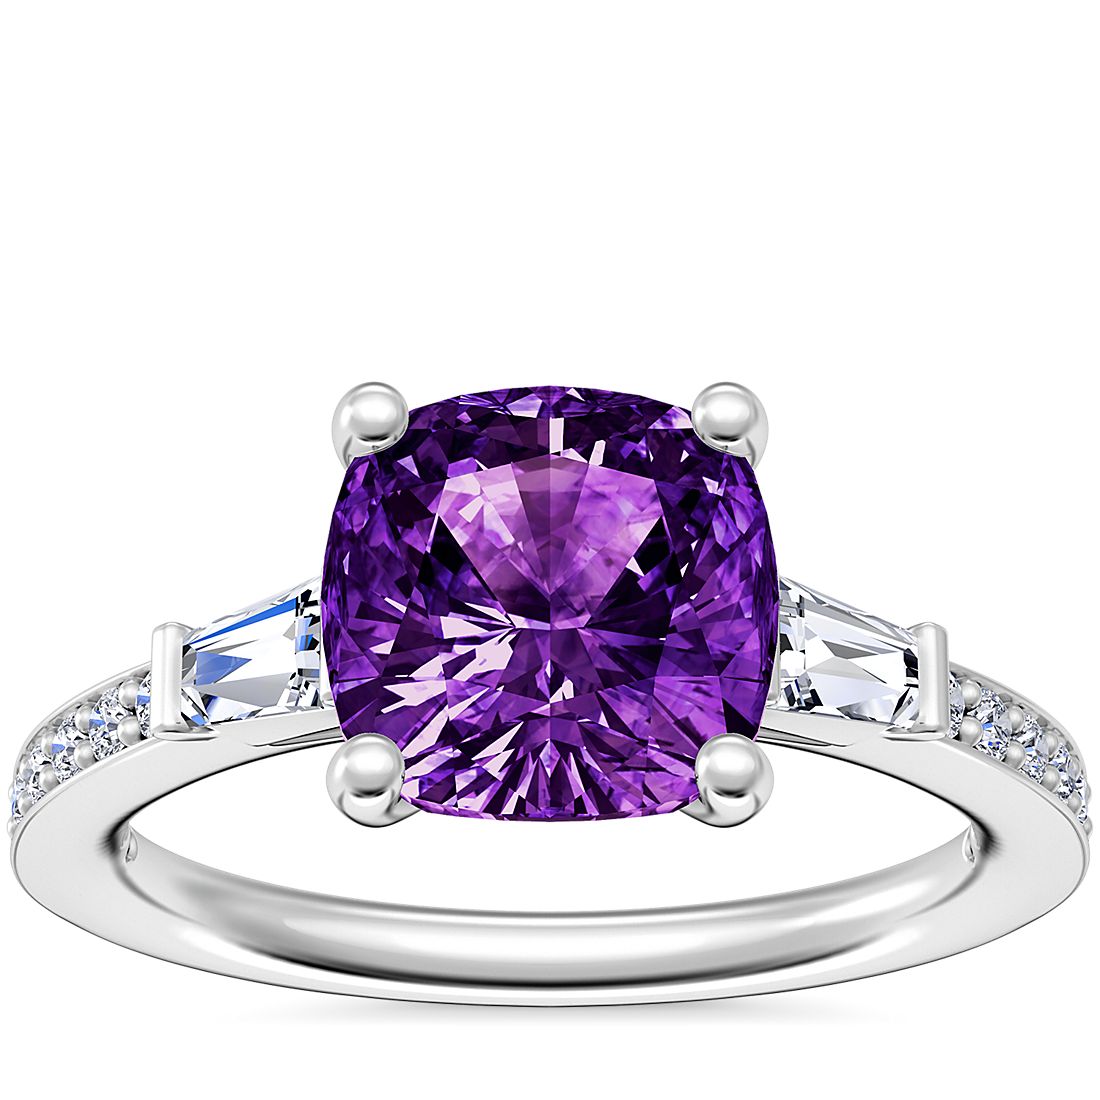 Tapered Baguette Diamond Cathedral Engagement Ring with Cushion Amethyst in Platinum (8mm)